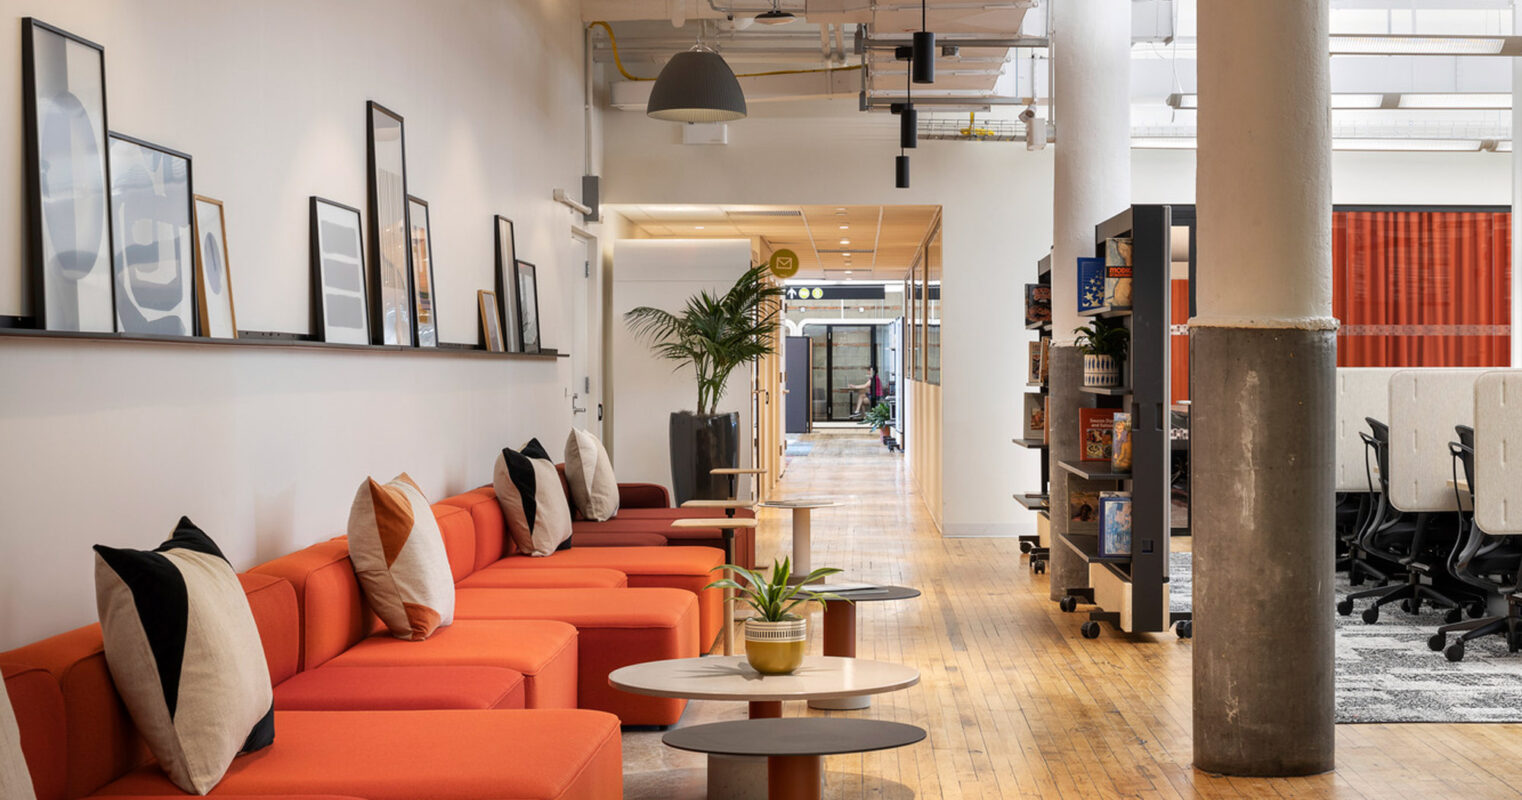 Modern open-plan office featuring a vibrant orange sectional sofa, eclectic accent cushions, and round coffee tables. Exposed beams and ductwork contrast with sleek furnishings and framed artwork, embodying industrial-chic design elements.